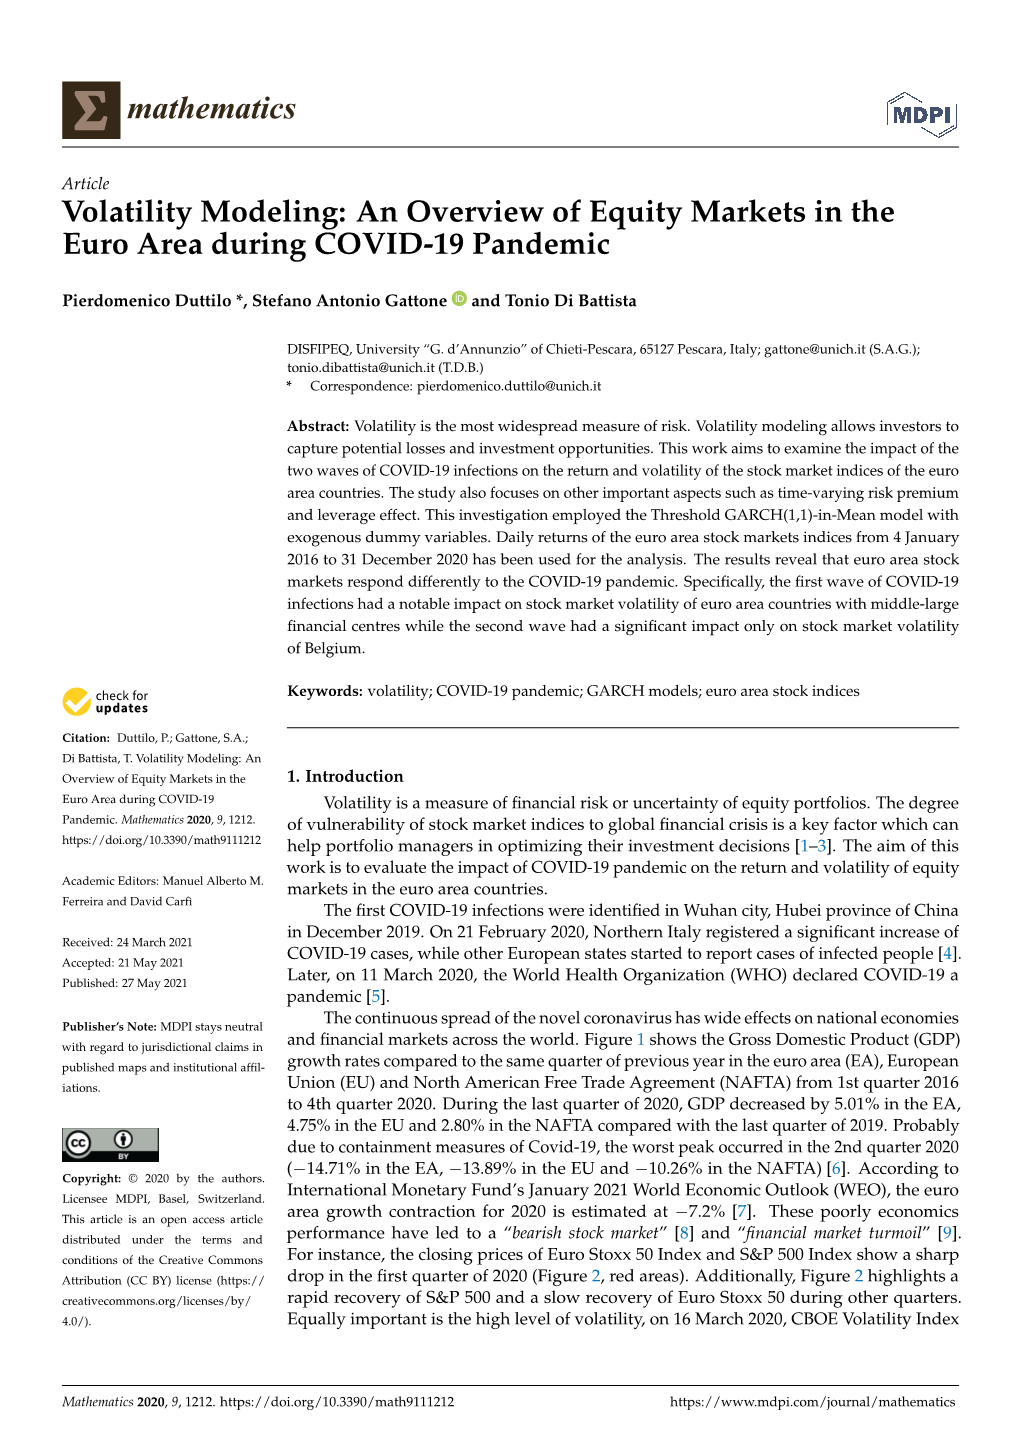 Volatility Modeling: an Overview of Equity Markets in the Euro Area During COVID-19 Pandemic